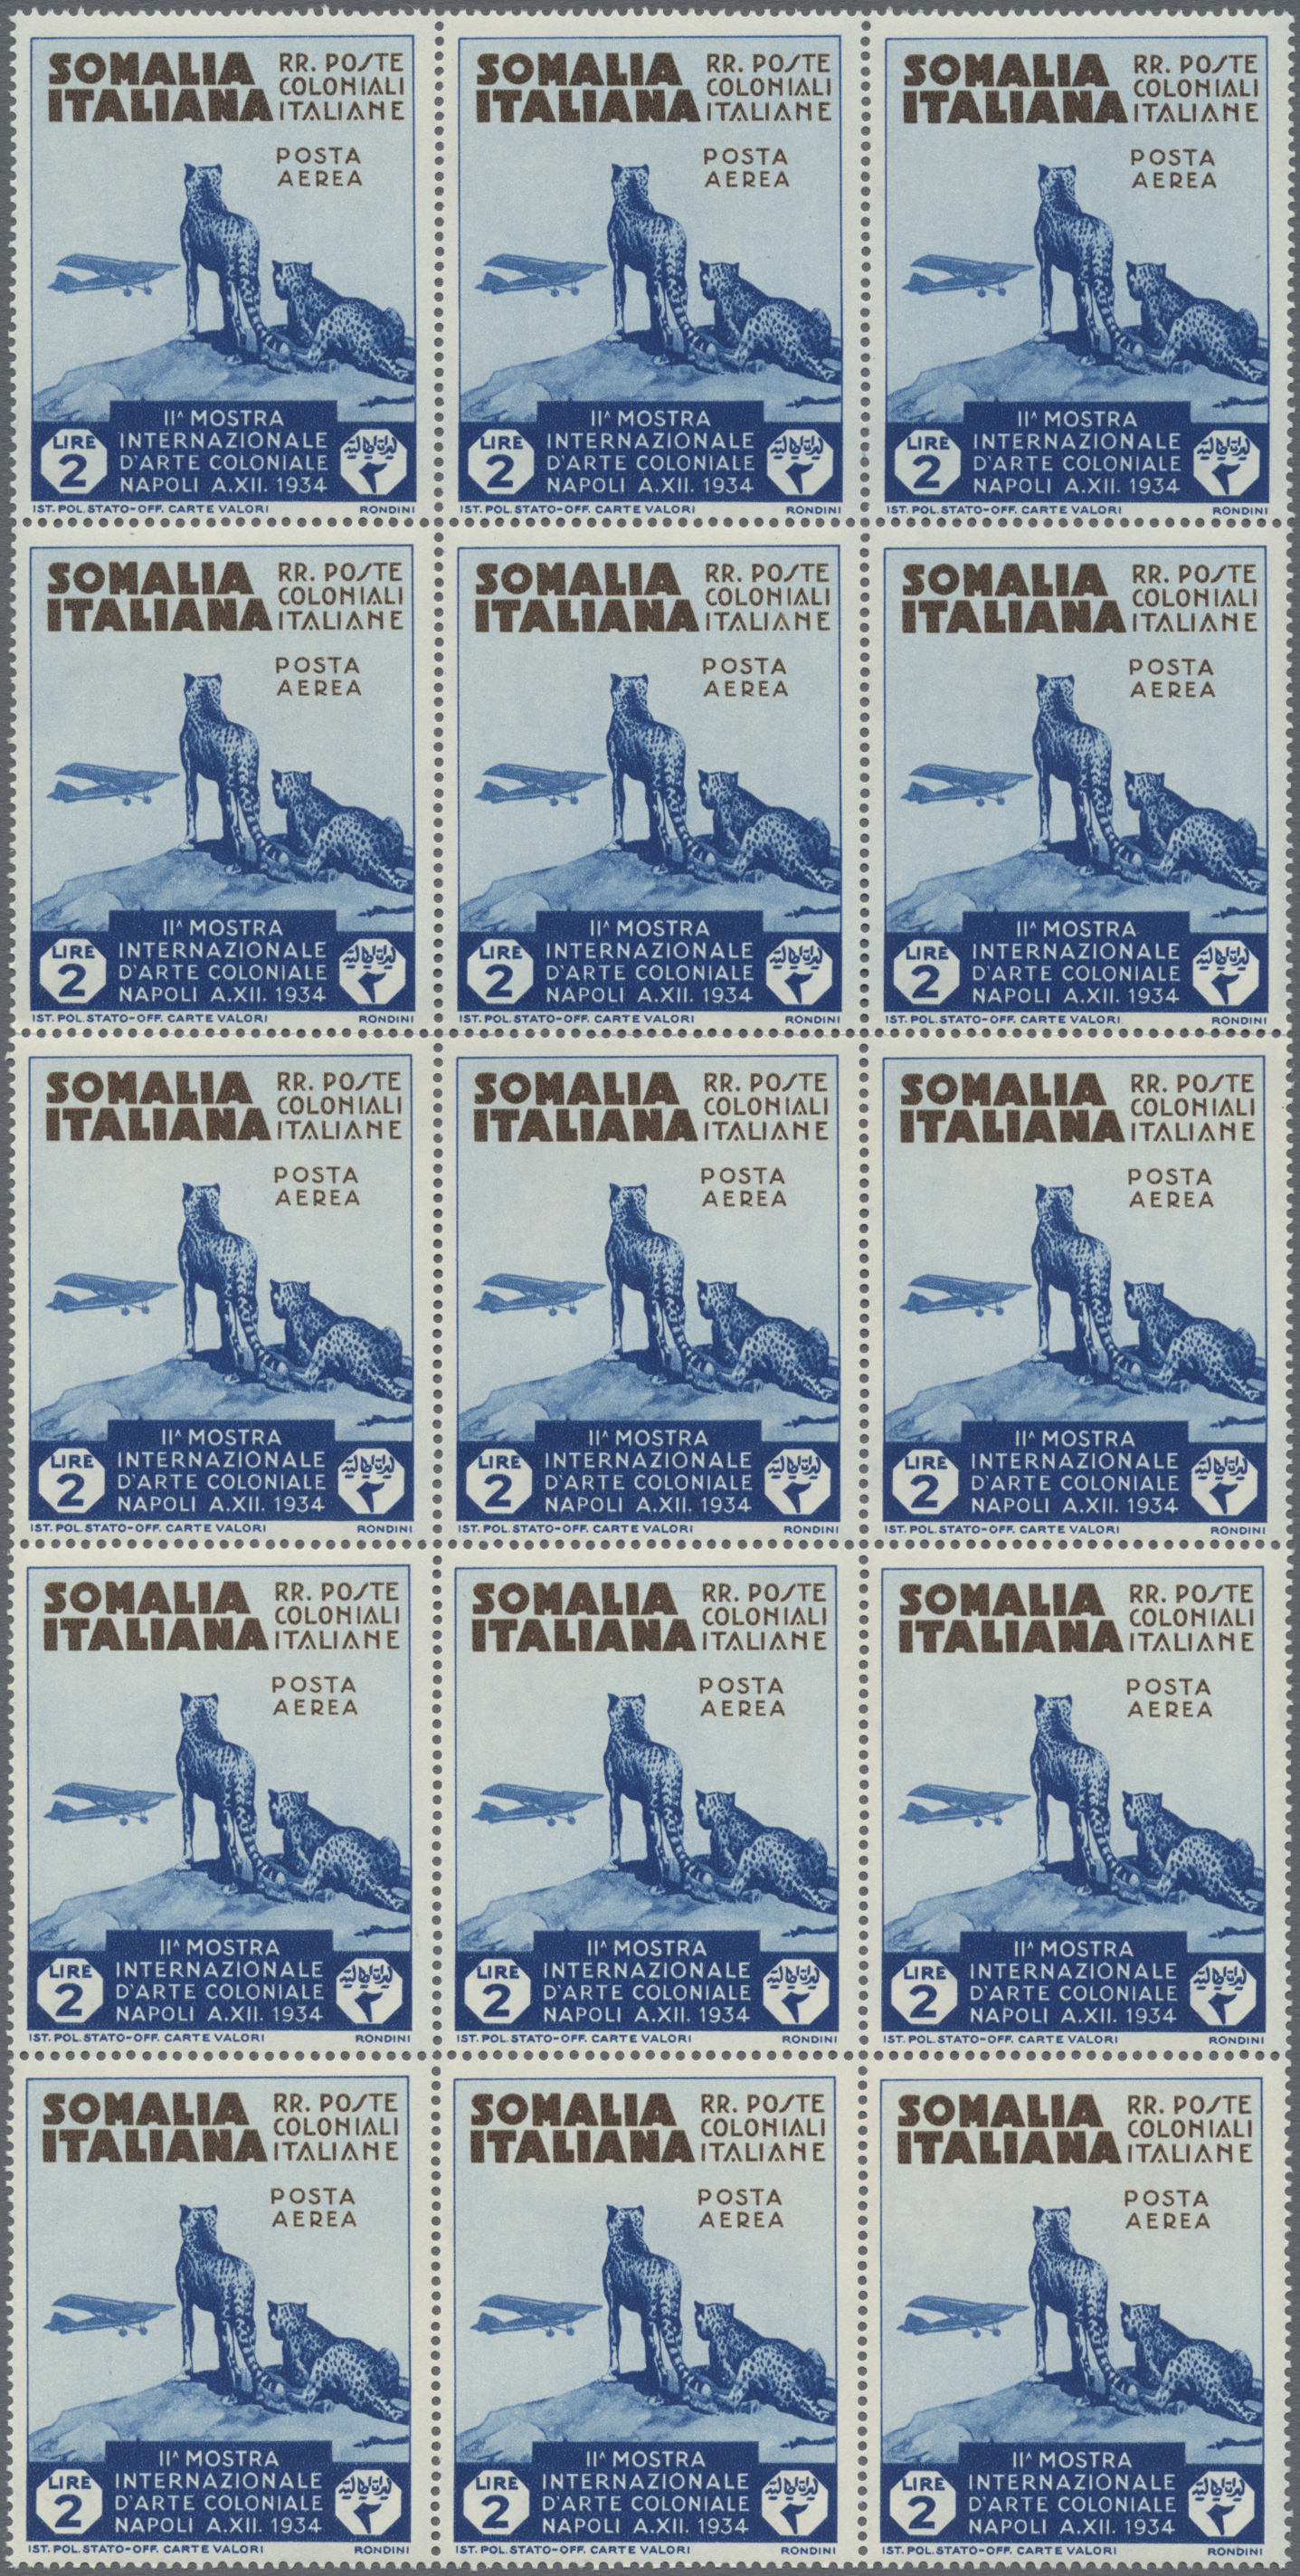 Lot 07483 - italienisch-somaliland  -  Auktionshaus Christoph Gärtner GmbH & Co. KG 55th AUCTION - Day 4